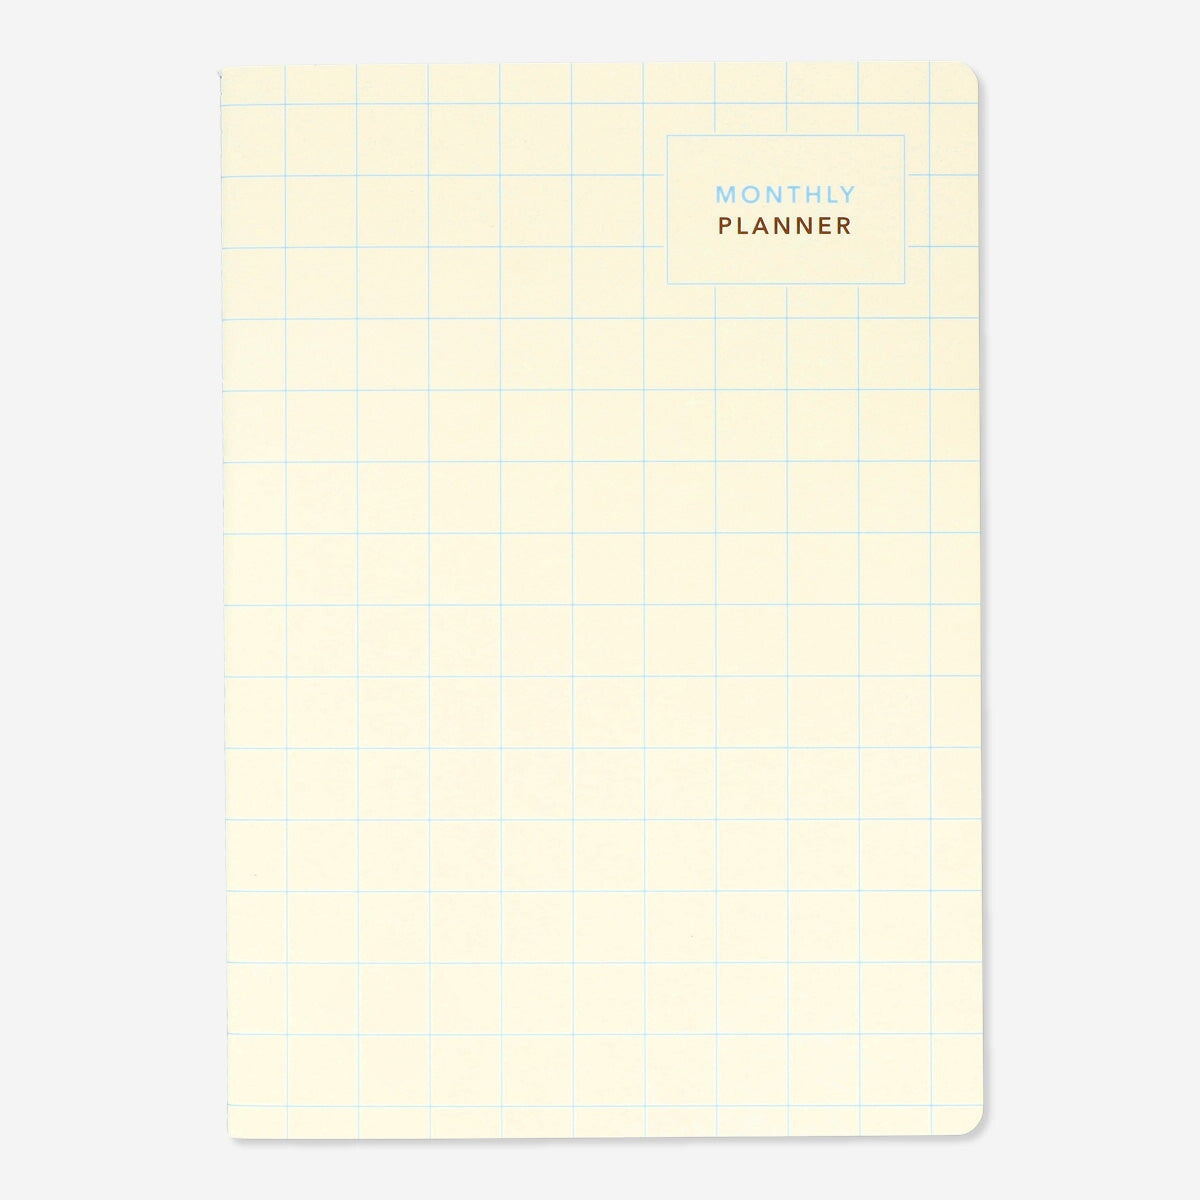 Image of Monthly planner